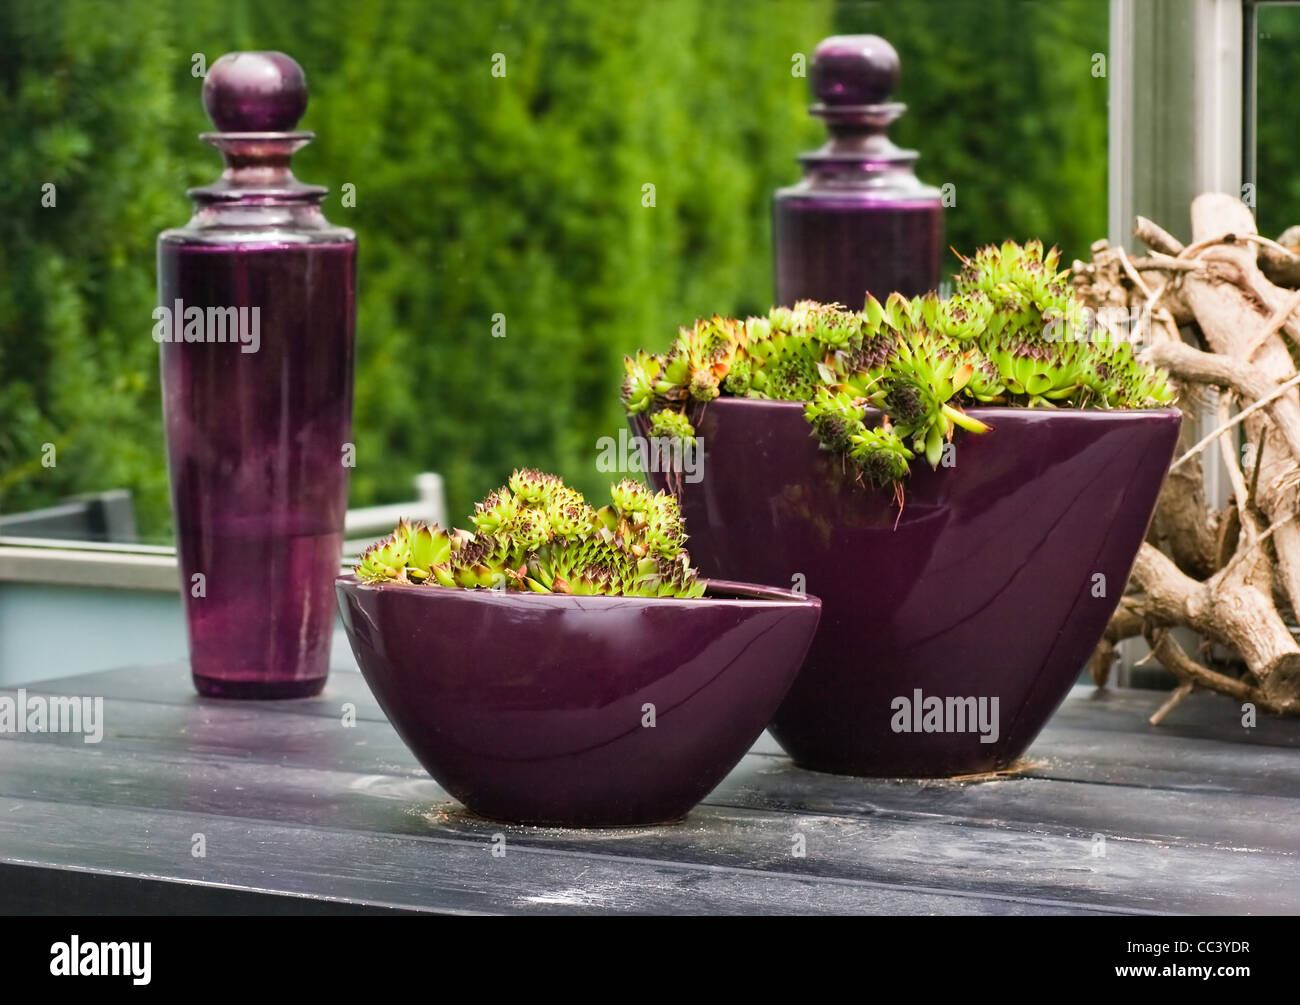 Purple glass bottles and vases with plants on table in the garden in summer Stock Photo